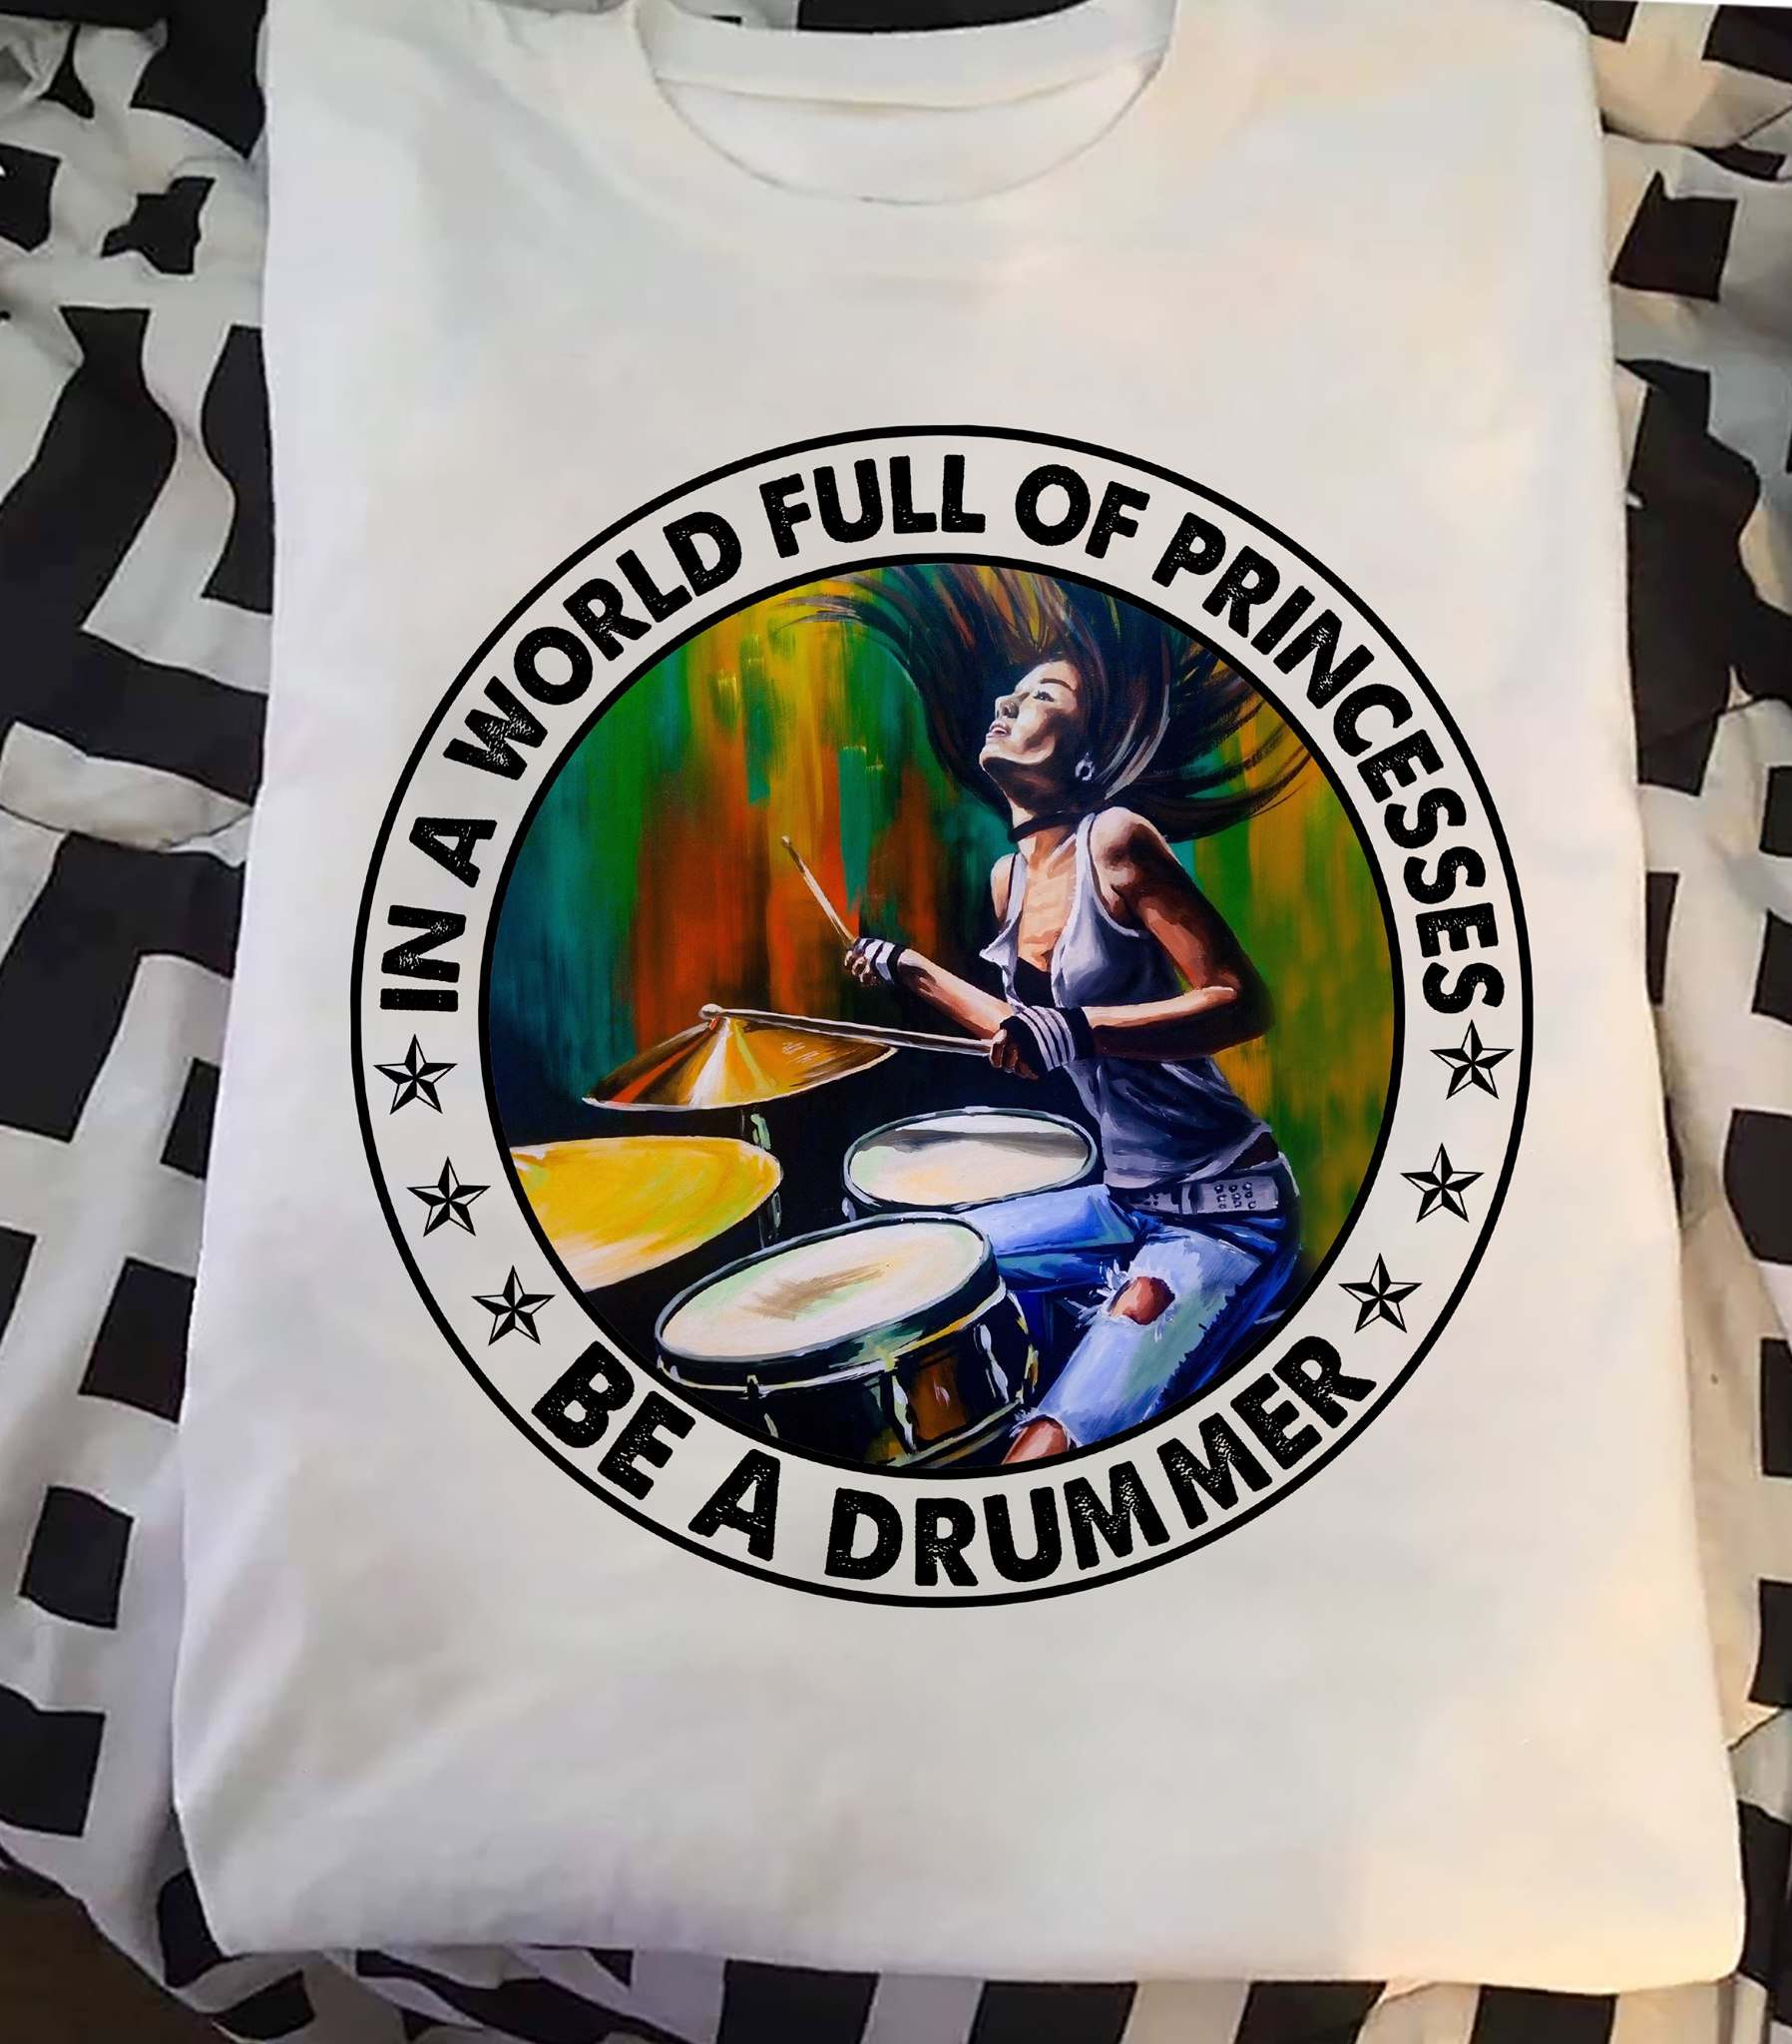 In a world full of princesses be a drummer - Woman drummer